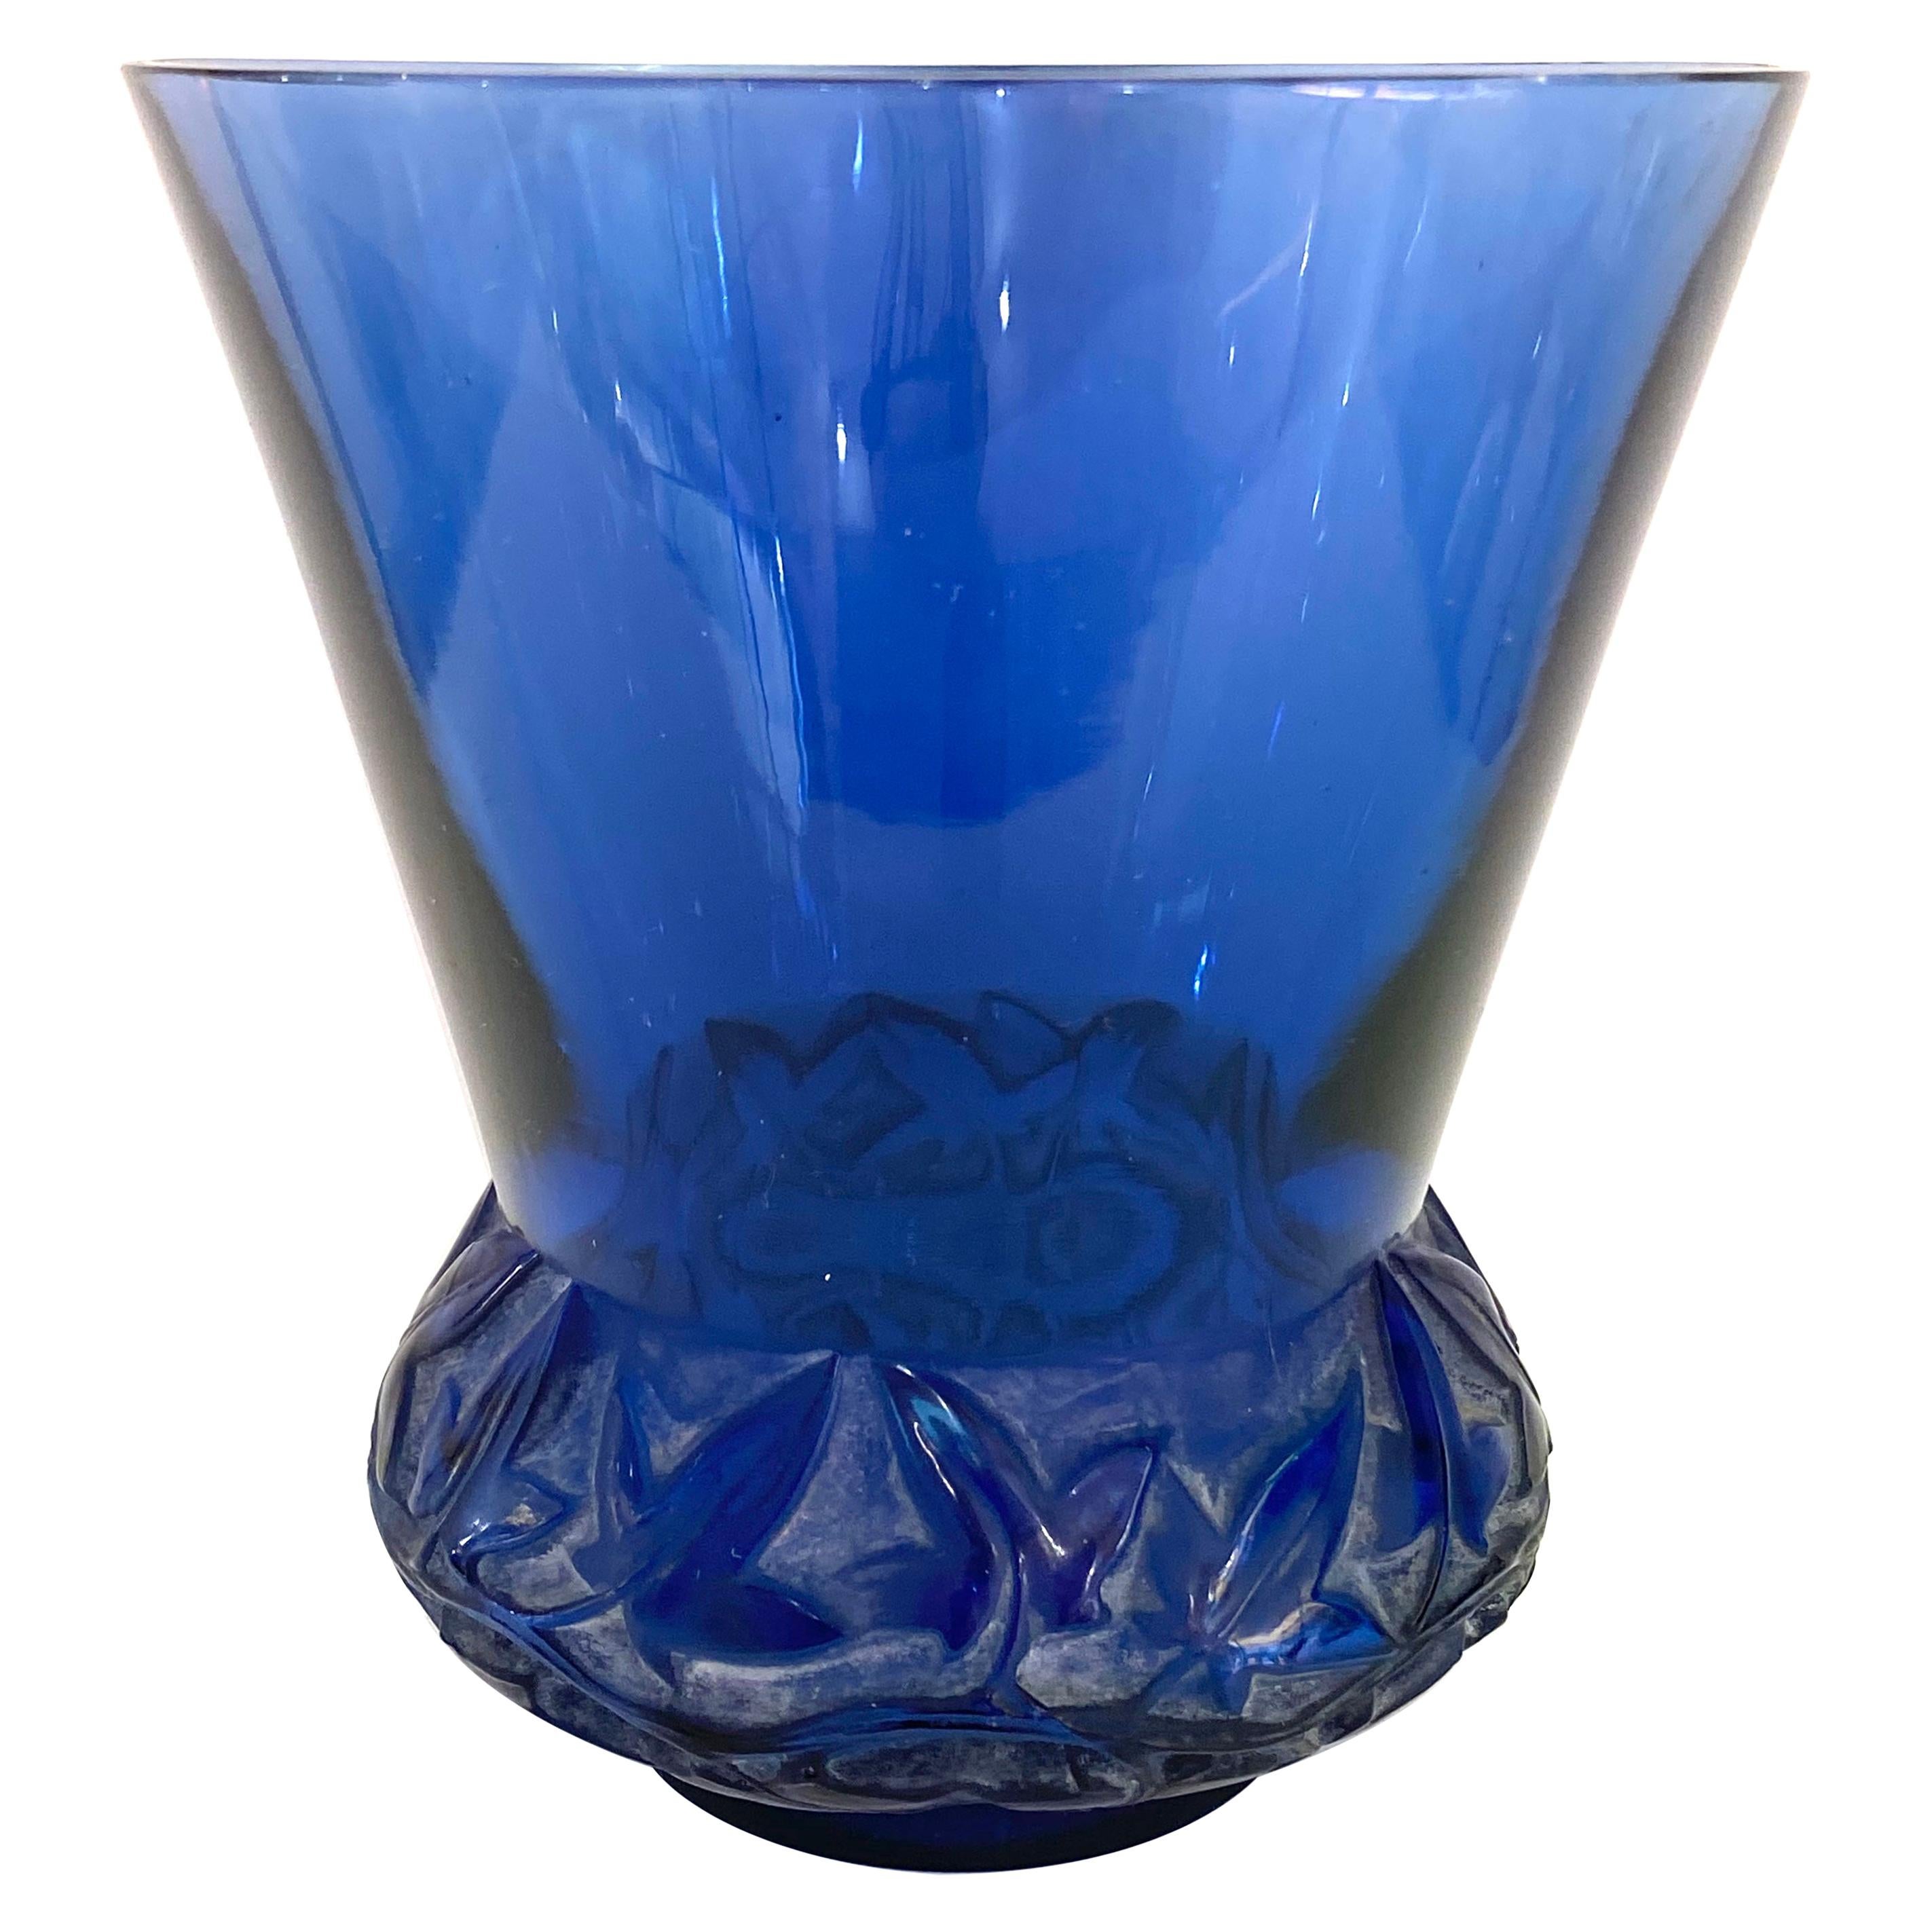 1930 René Lalique Lierre Vase in Navy Blue Glass White Patina, Ivy